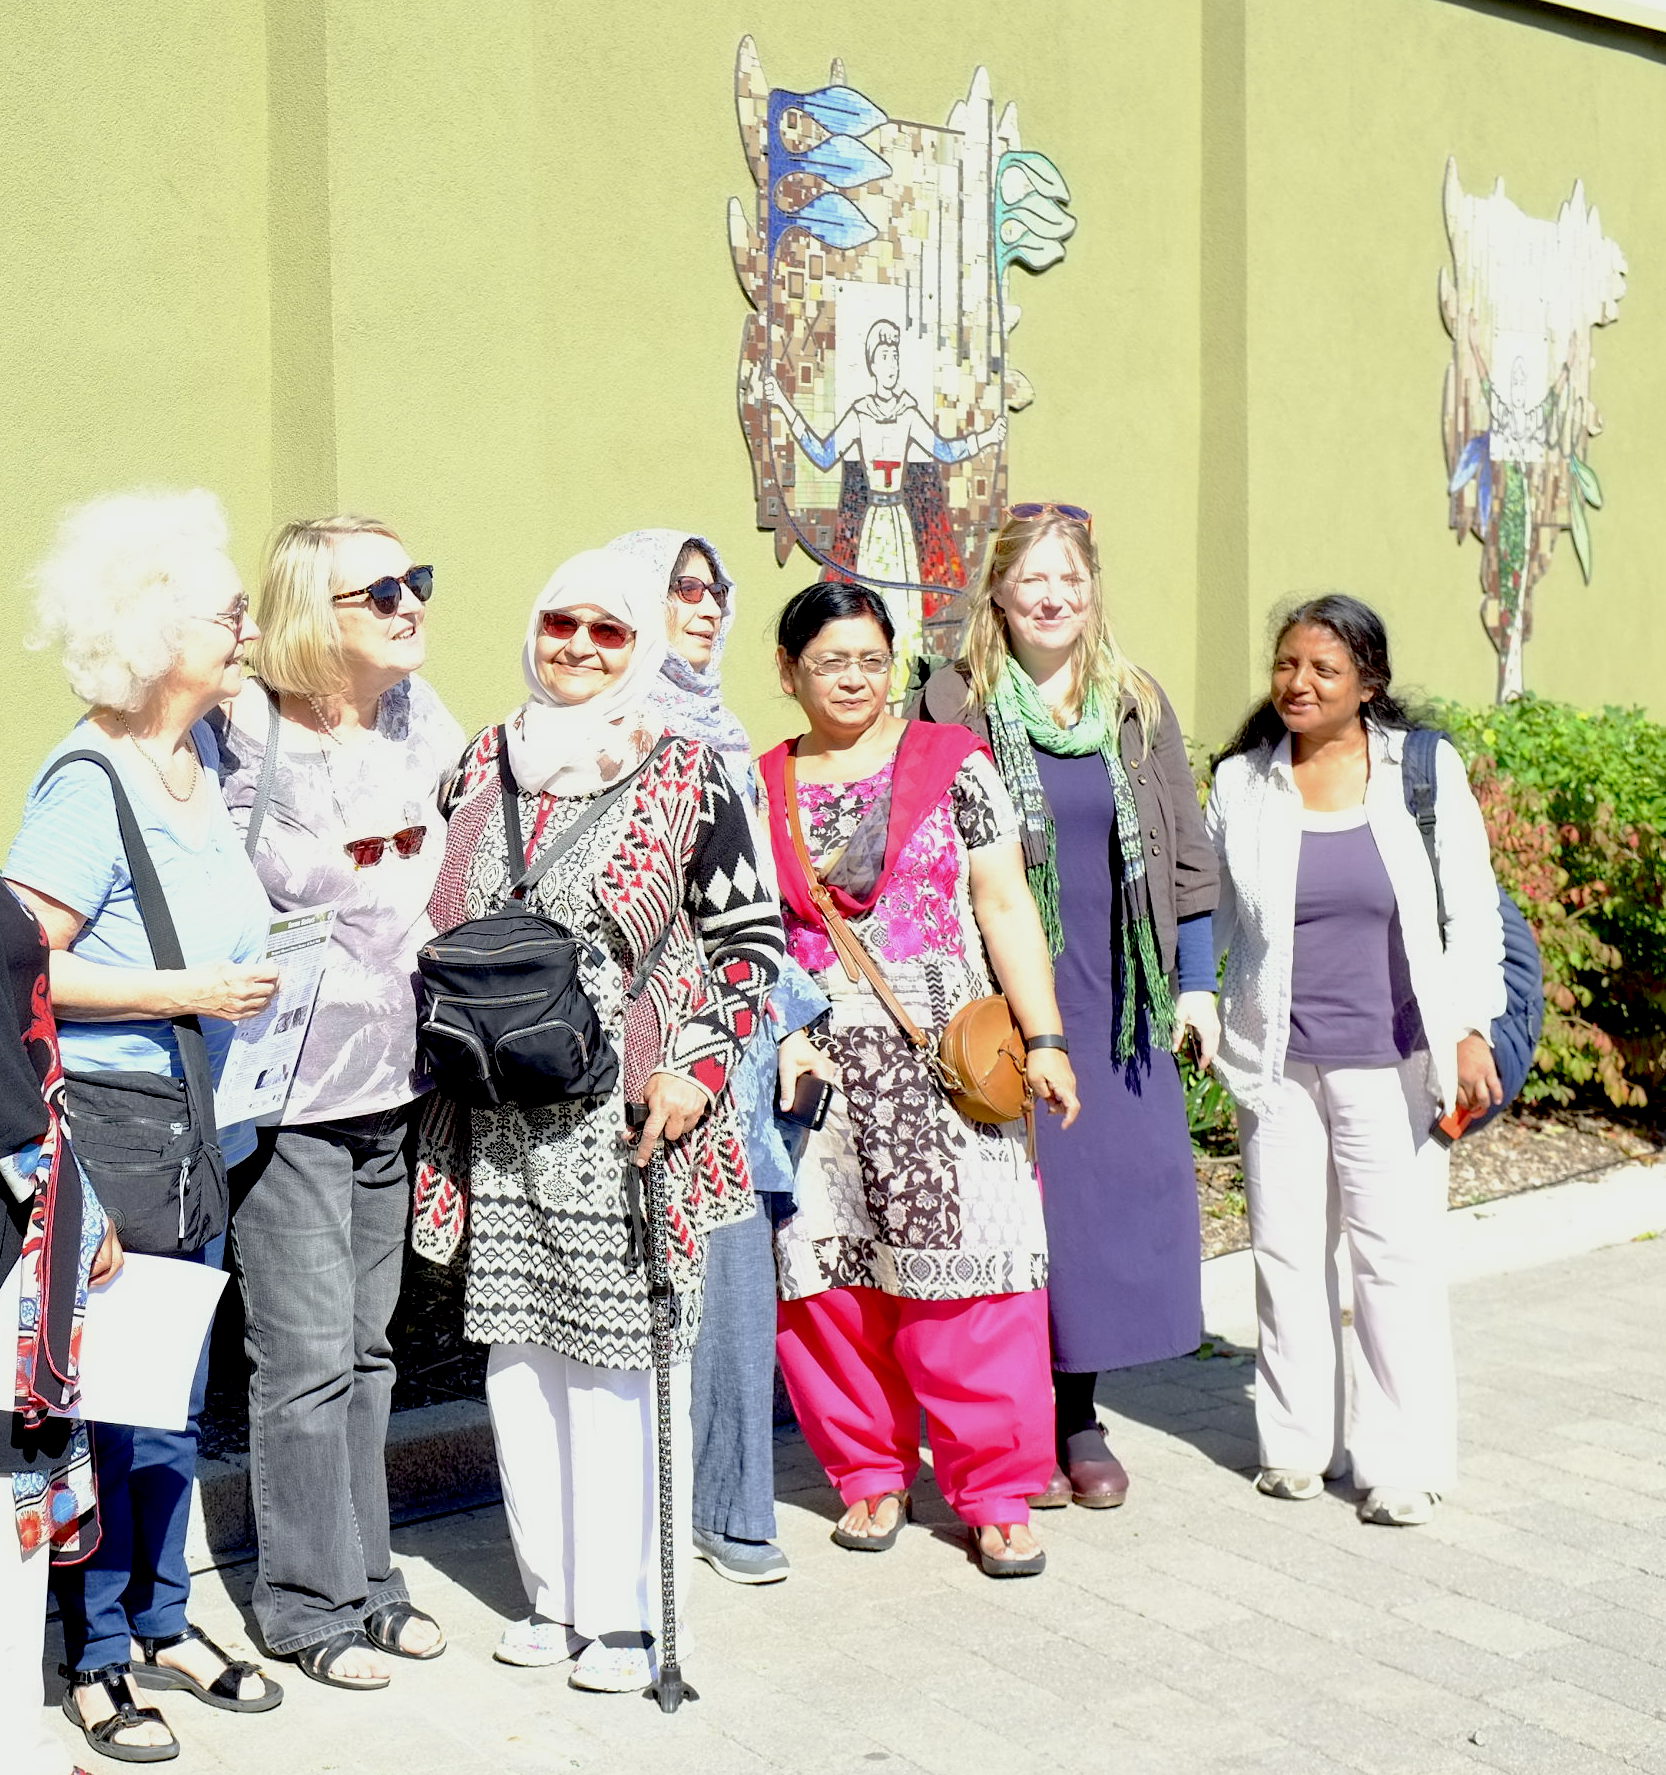 multi cultural group of ladies who helped make the mosaic behind them